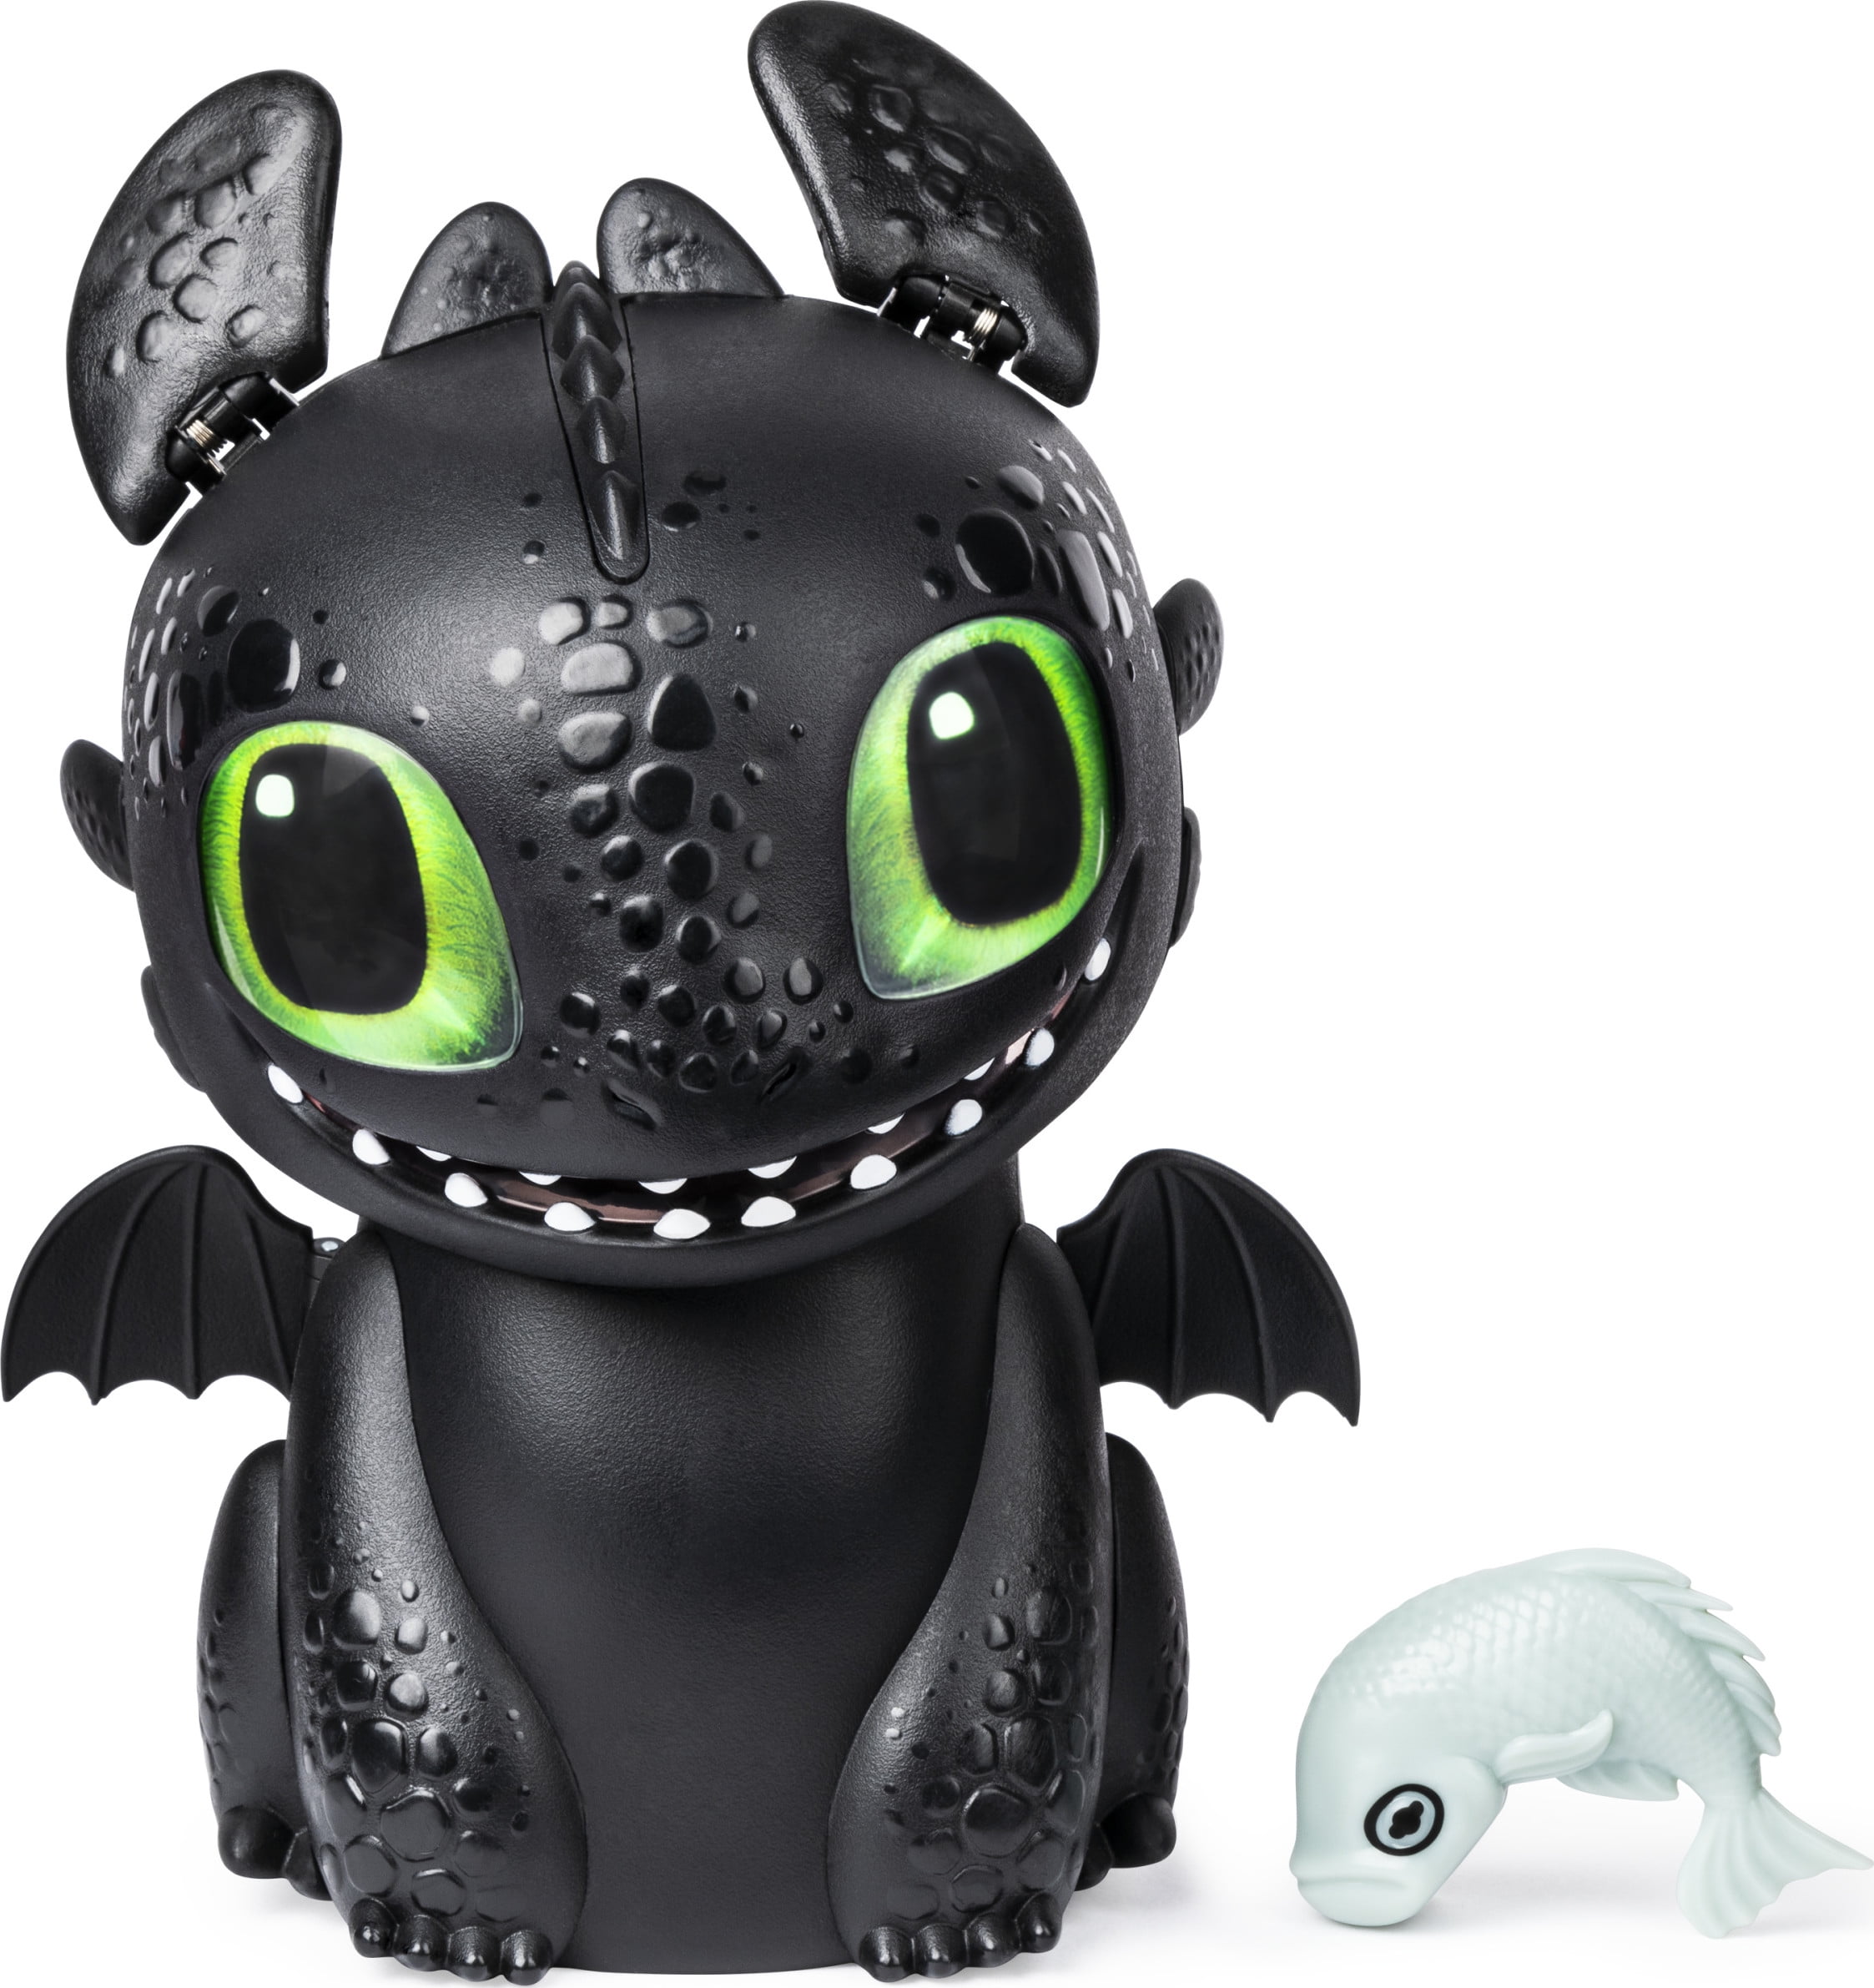 Dreamworks Dragons Hatching Toothless Interactive Baby Dragon for sale online